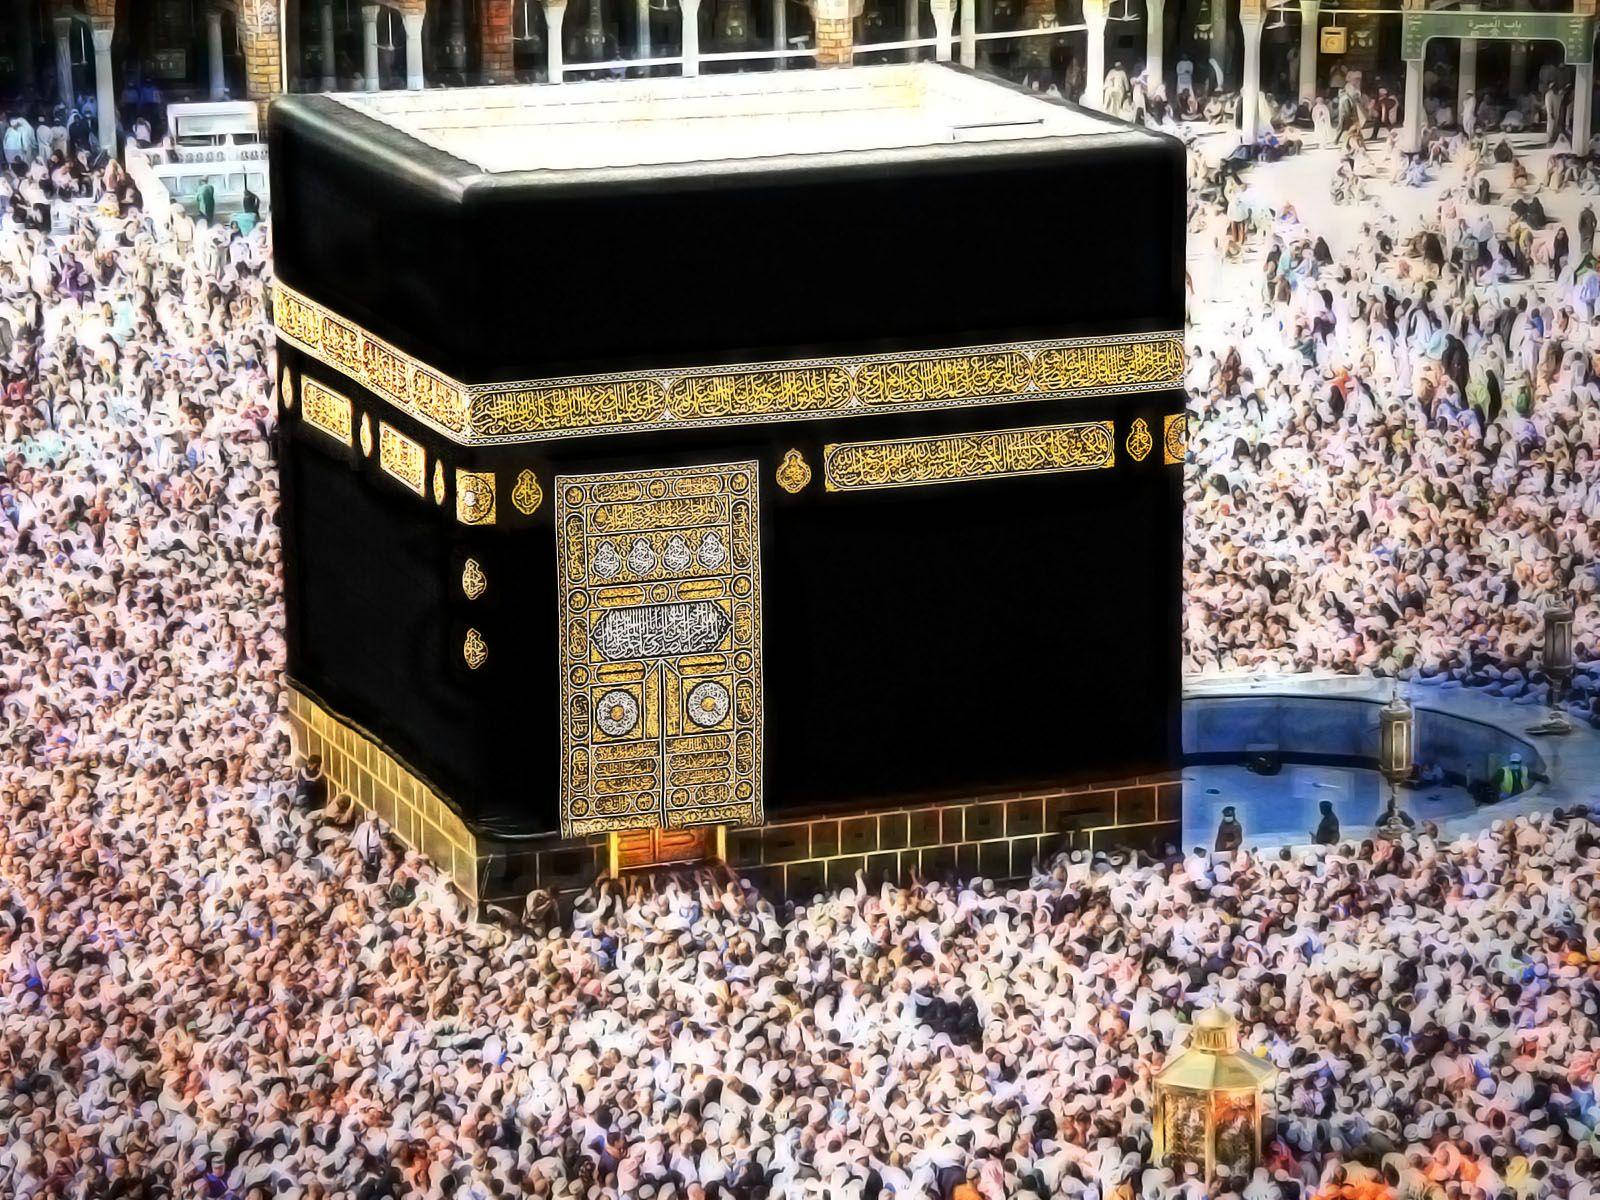 Stunning High Resolution Image Of The Kaaba, The Black Stone Worship Place In Makkah